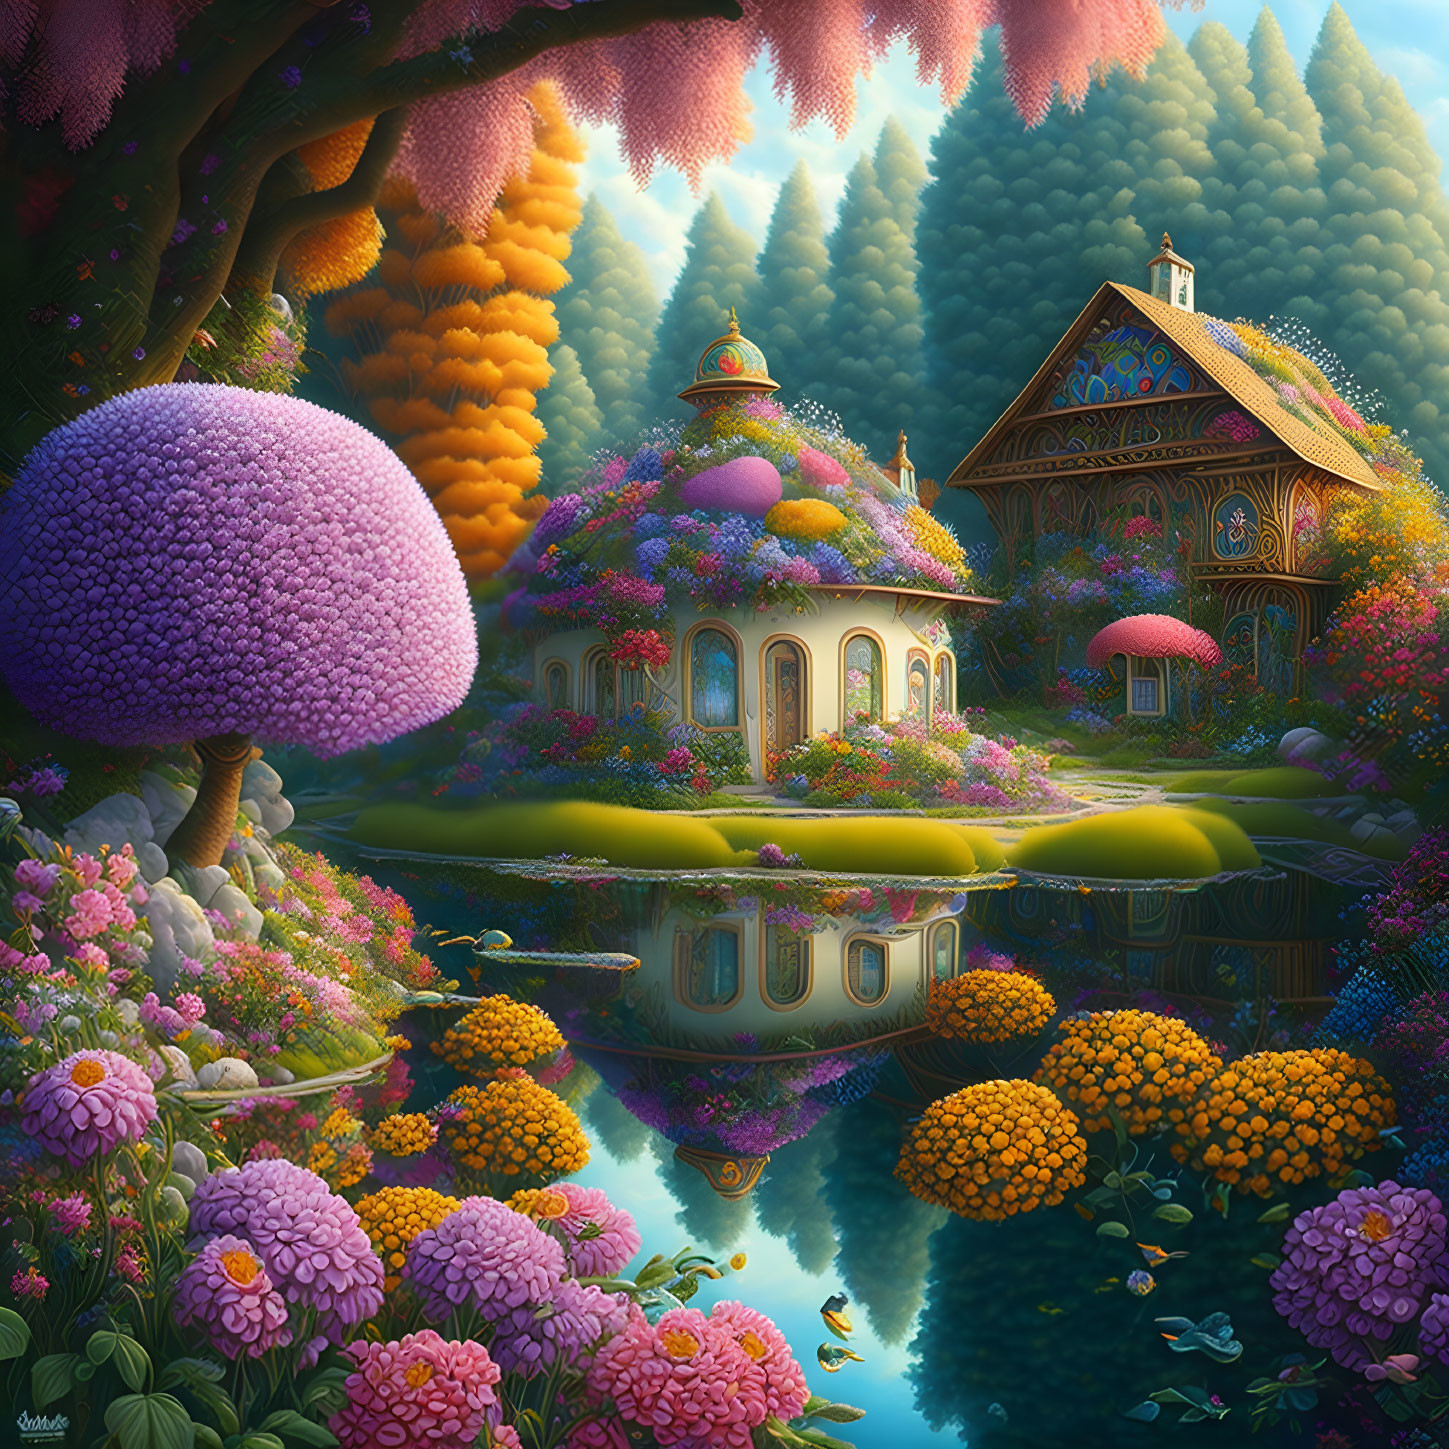 Colorful fantasy landscape with mushroom buildings, flowers, pond, and stylized trees.